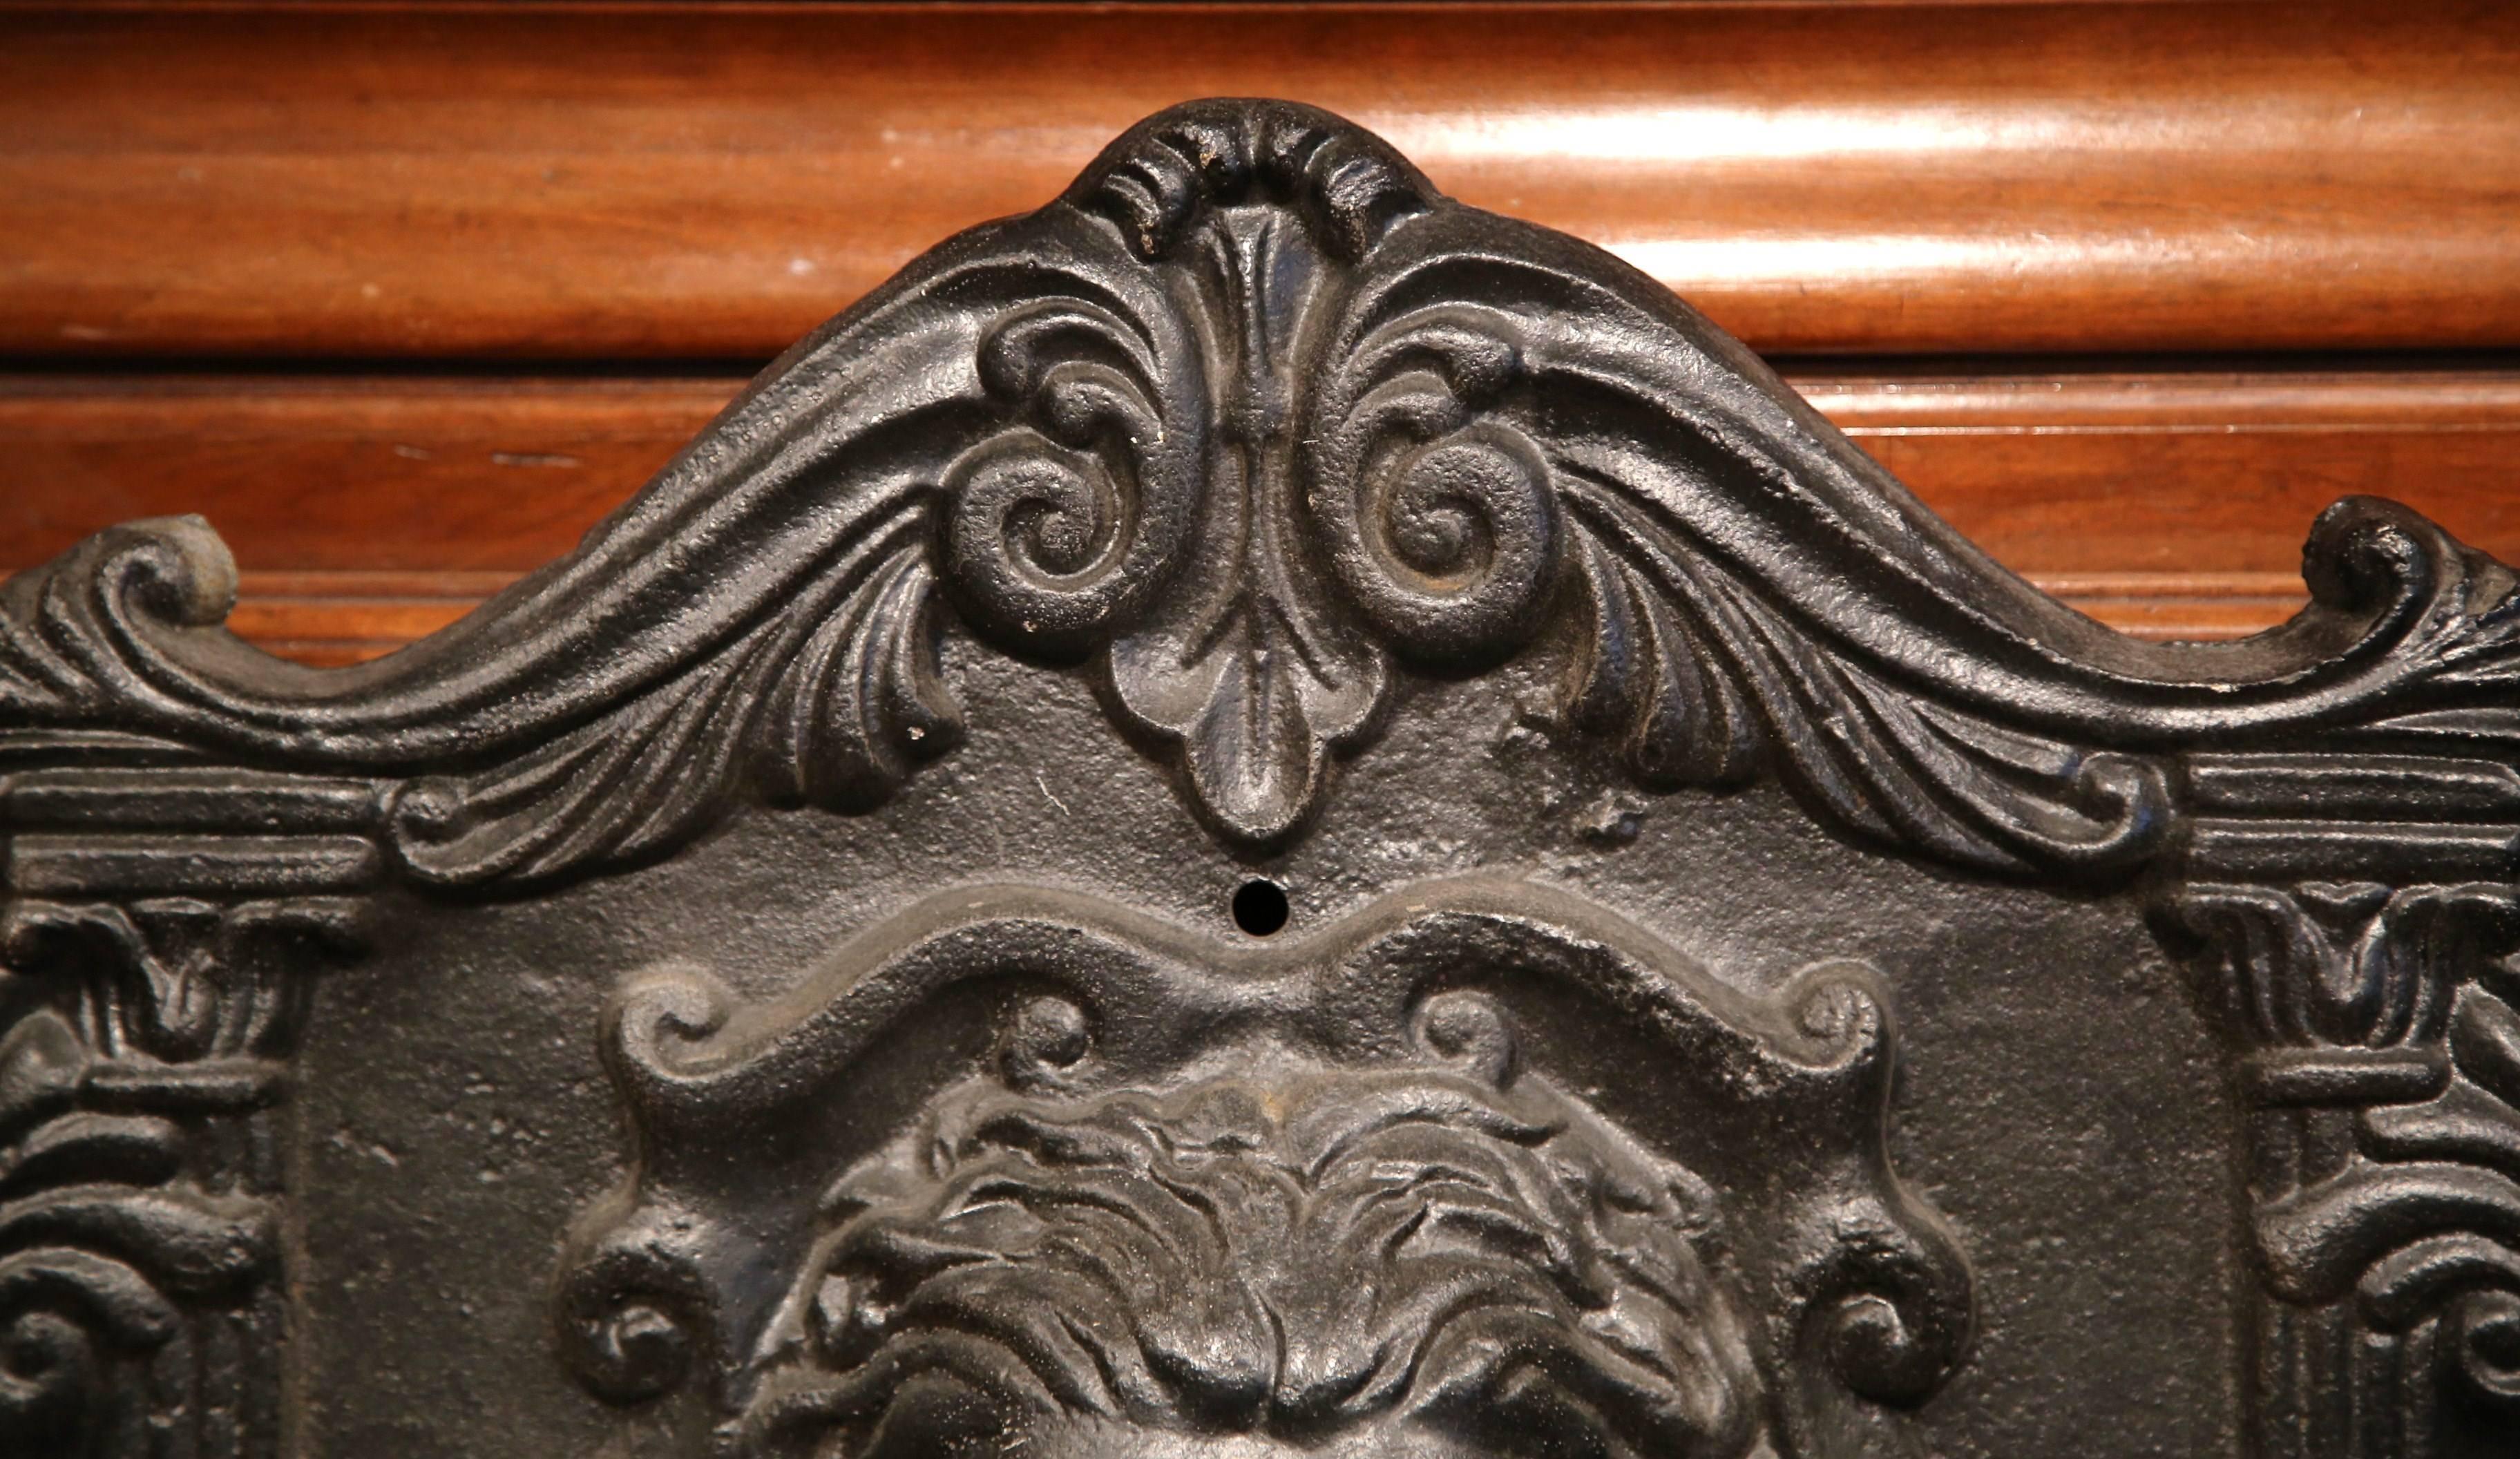 This fine antique wall fountain was crafted from cast iron in France, circa 1870. The exterior garden element features an expressive lion head surrounded by floral and decorative motifs. The spout is located directly under the lion, and below is a